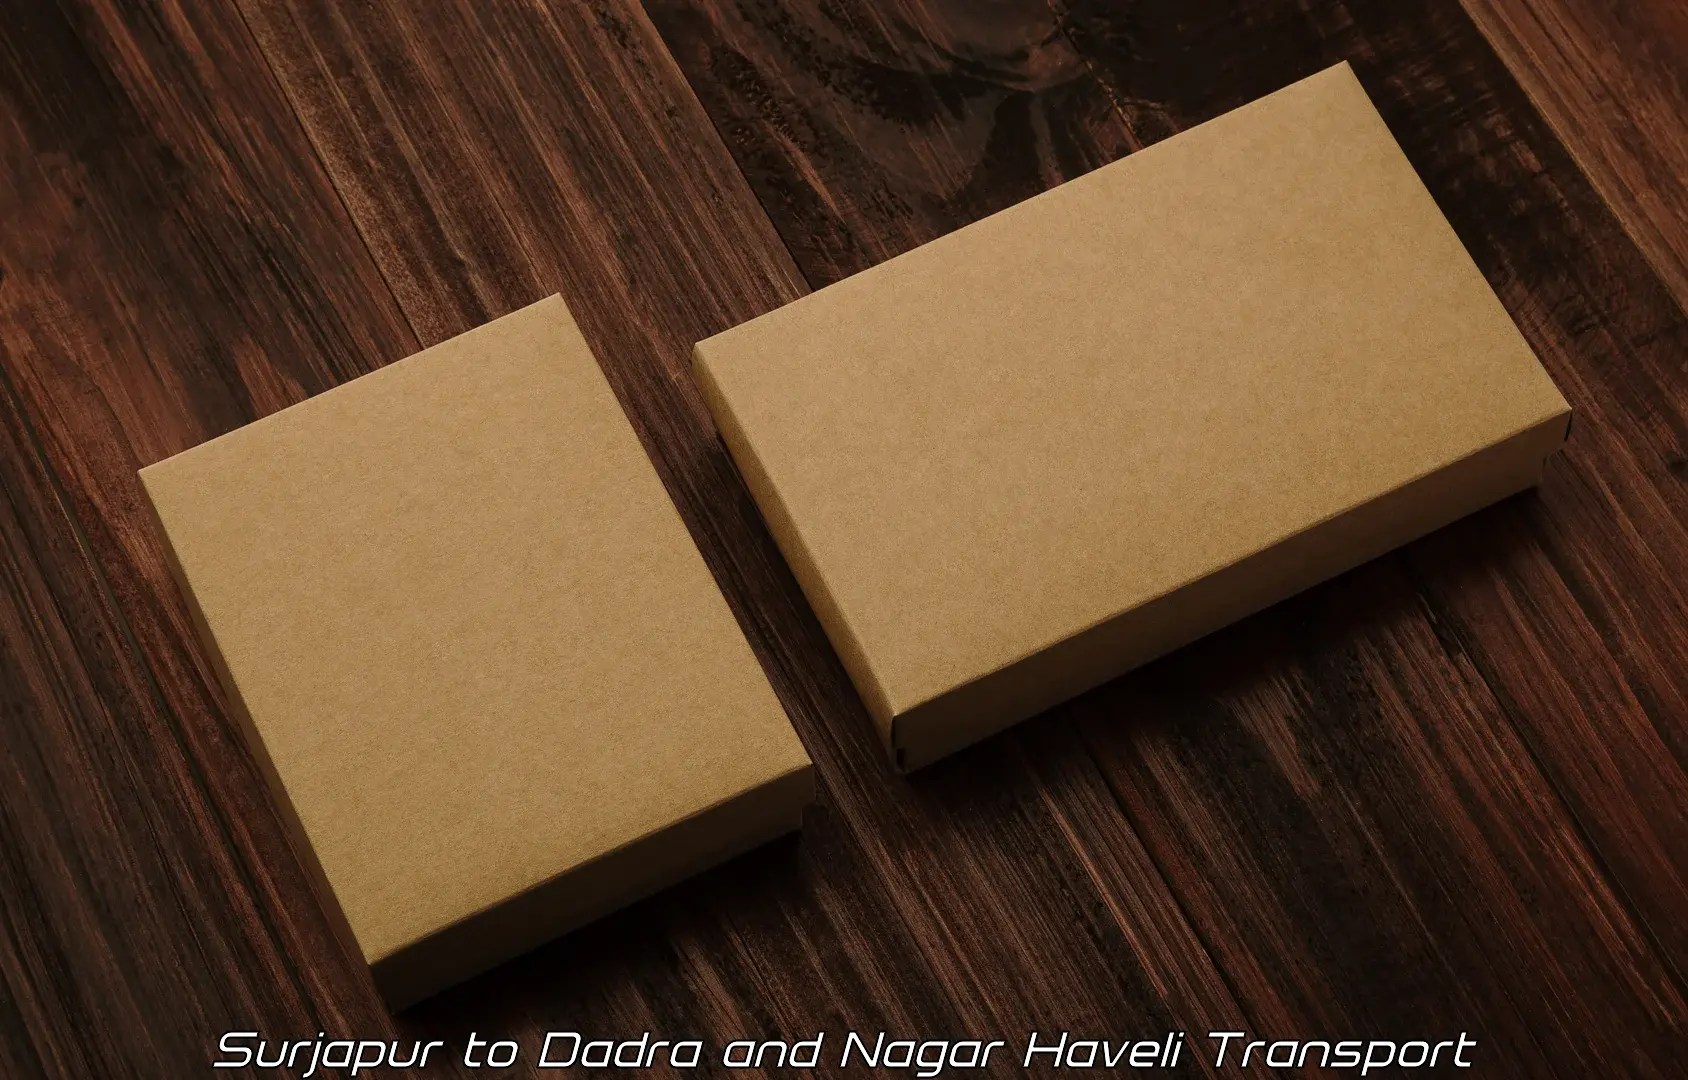 Container transport service Surjapur to Dadra and Nagar Haveli